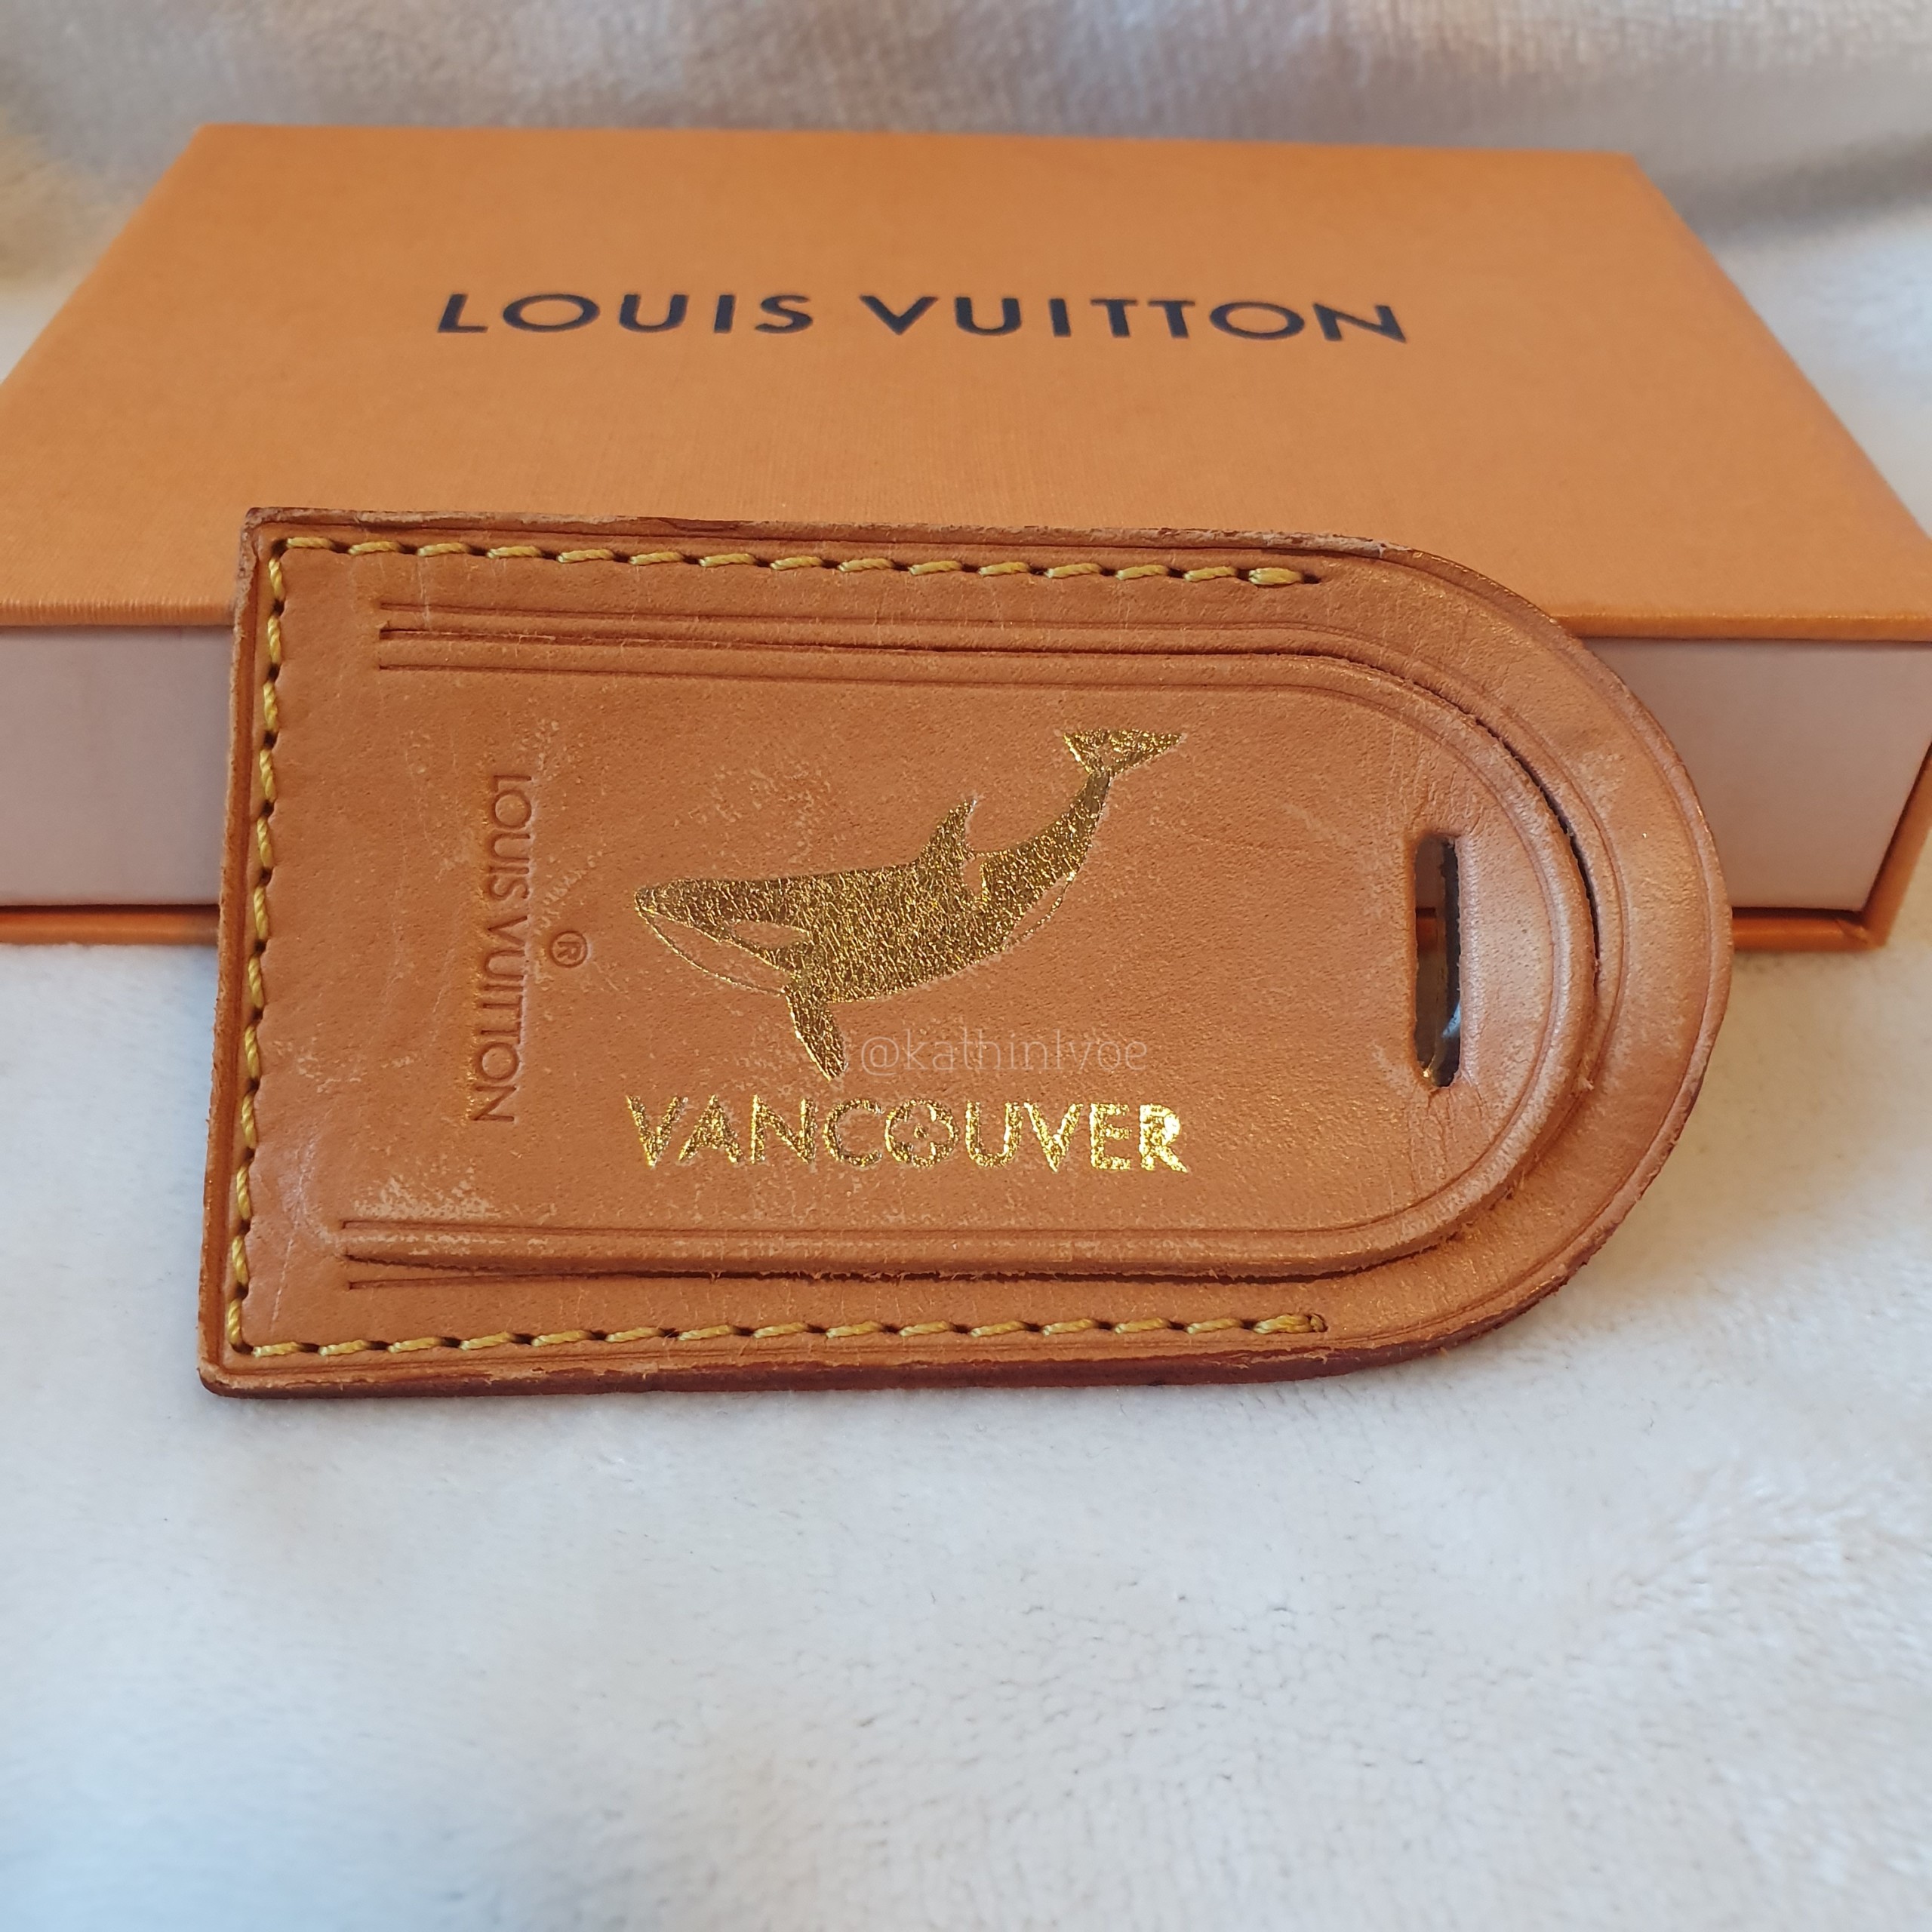 EVENTS: hot stamping with Louis Vuitton - Bikinis & Passports